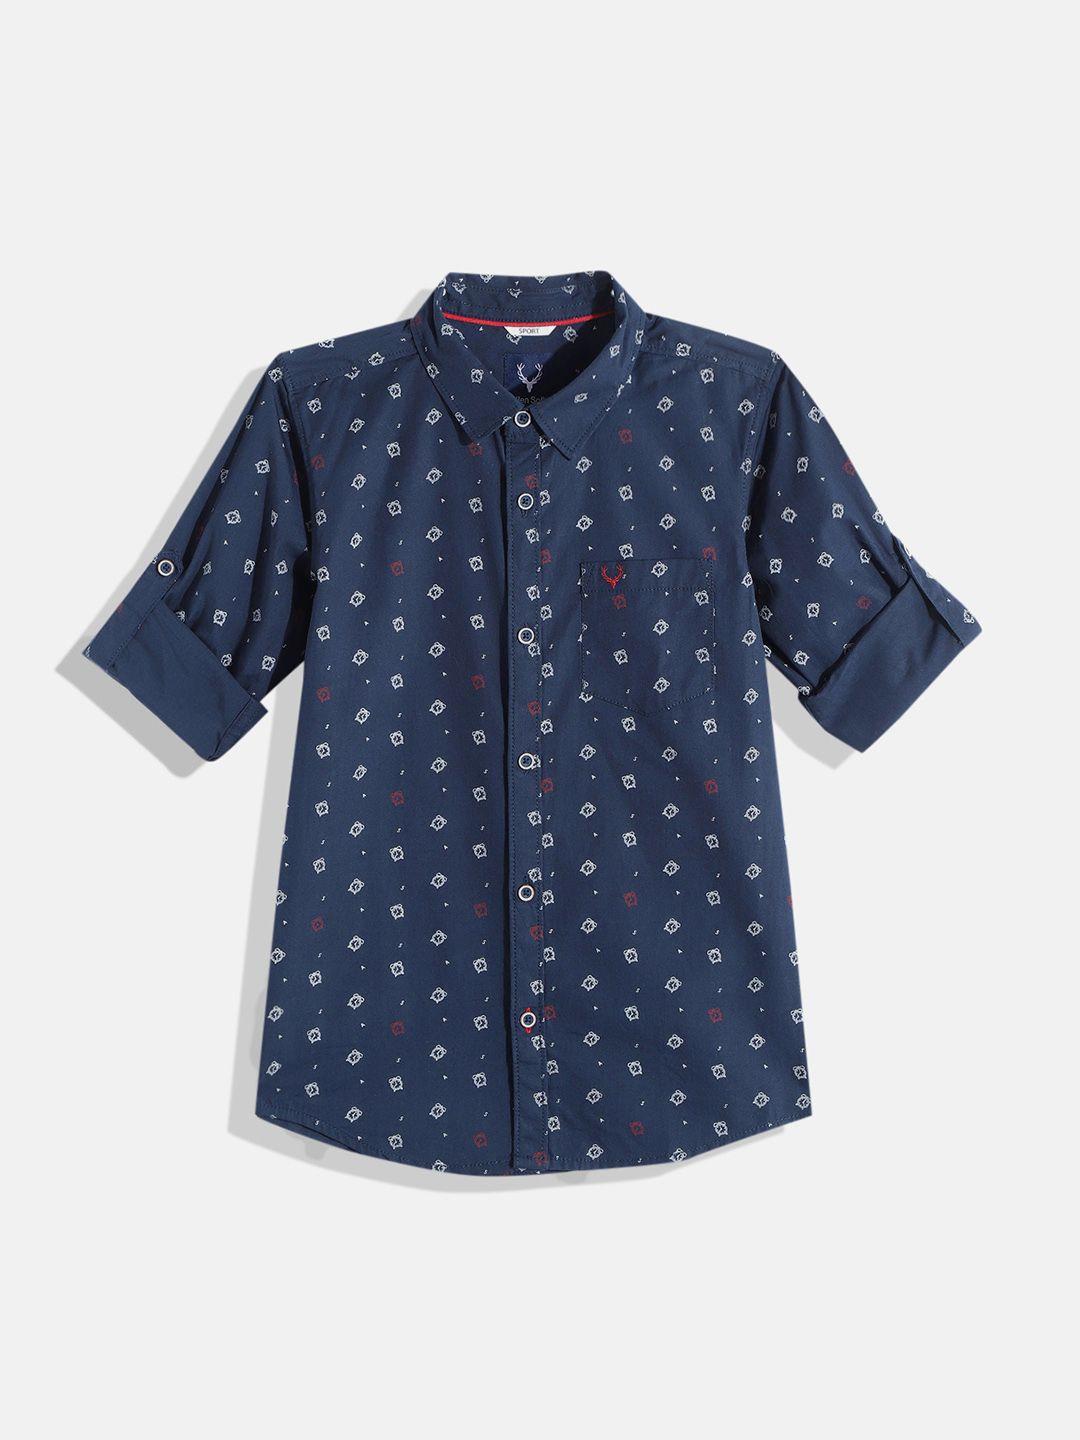 allen solly junior boys navy blue & white pure cotton classic printed casual shirt